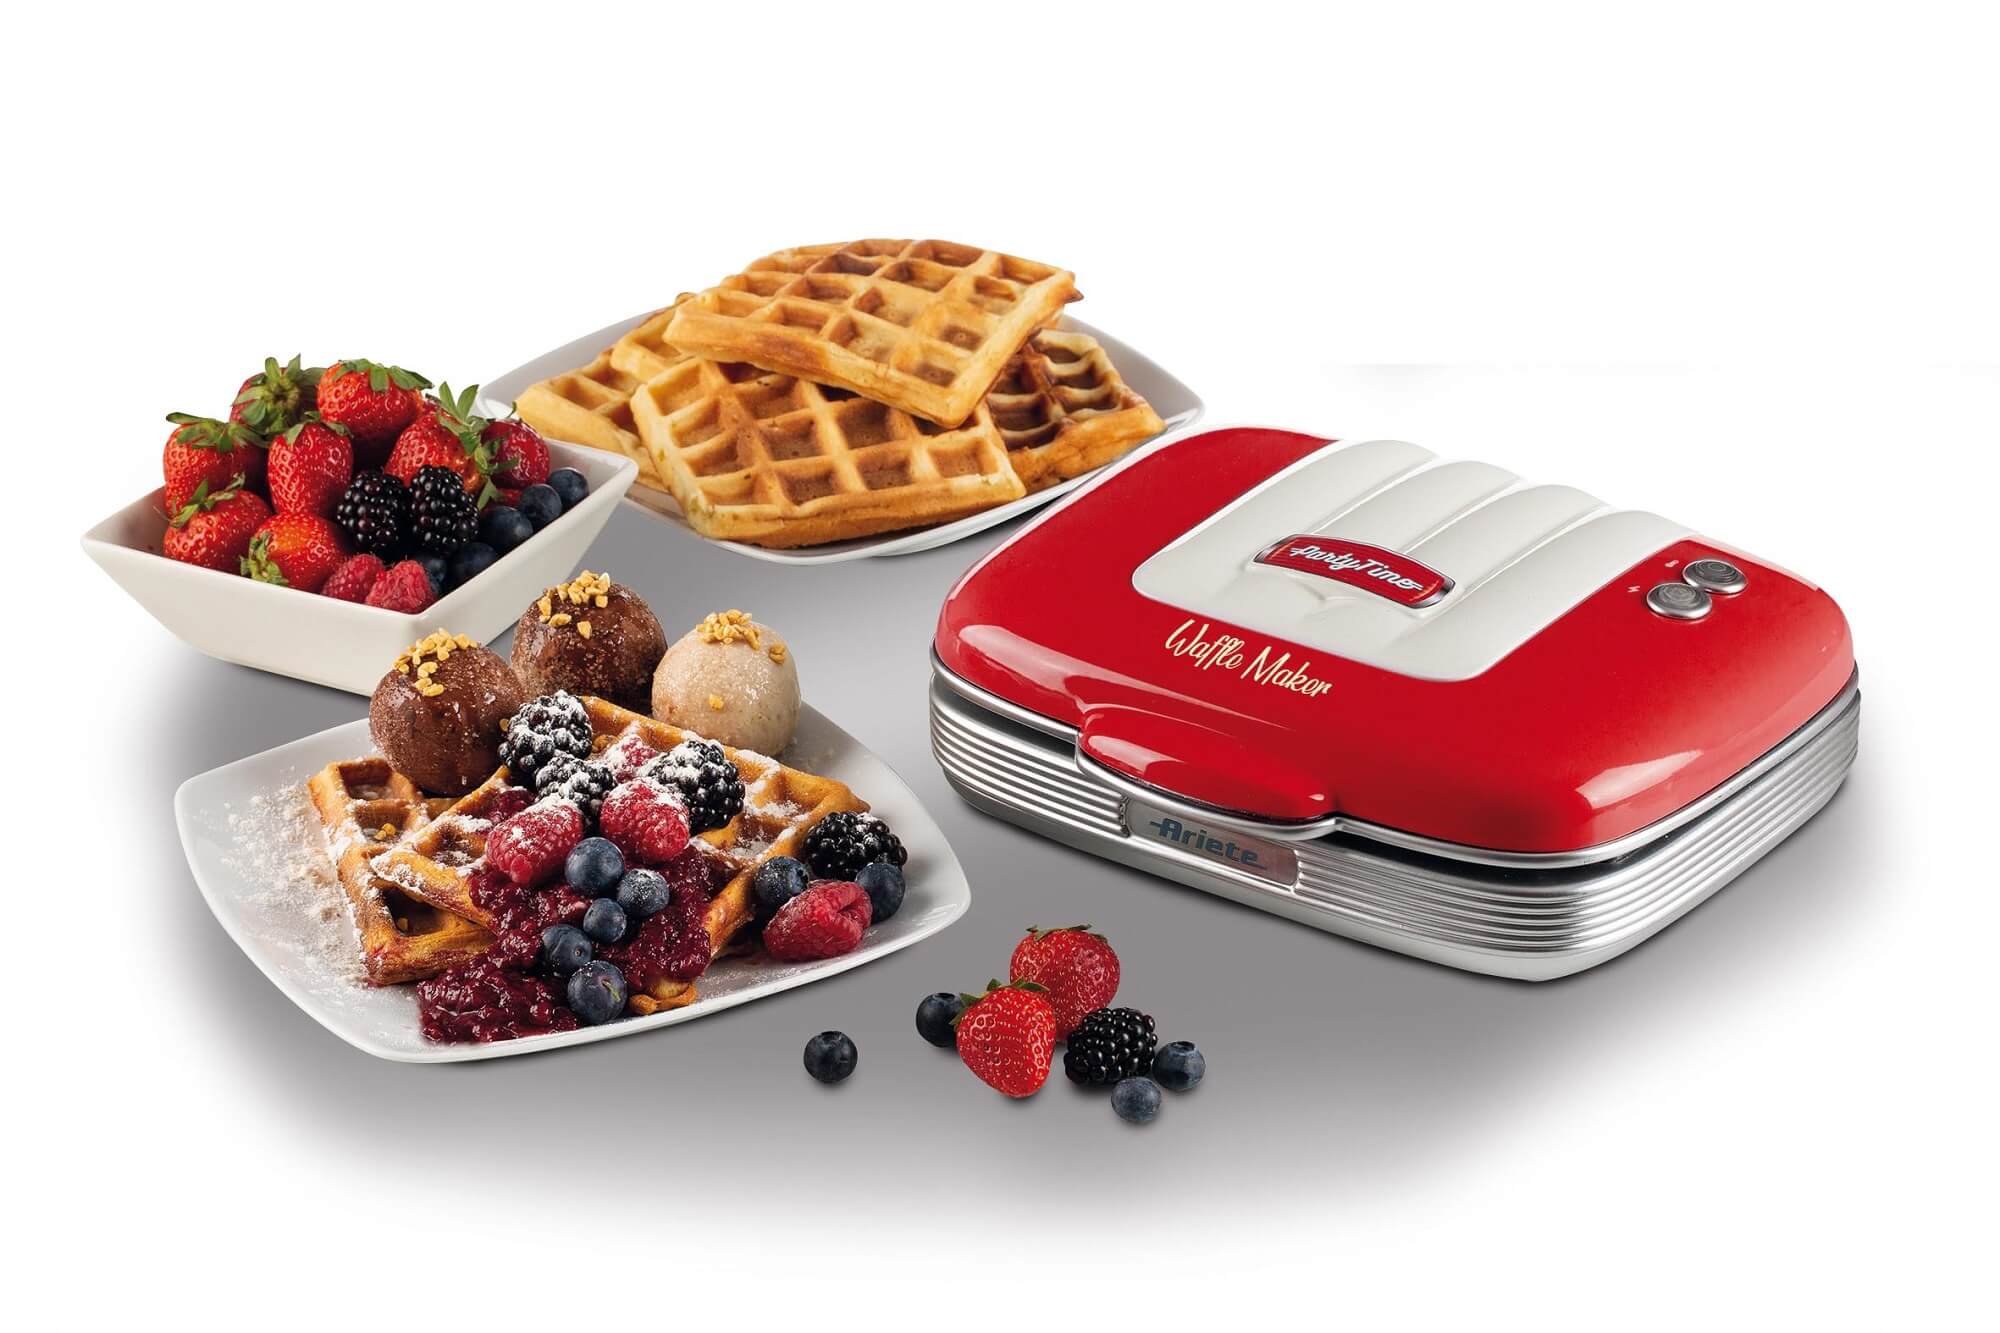 https://www.ariete.net/media/images/product/main/piastra-per-waffle-maker-party-time-1973-rosso-01-ab7a83e97d7f789fa22f70ee807e7990.jpg